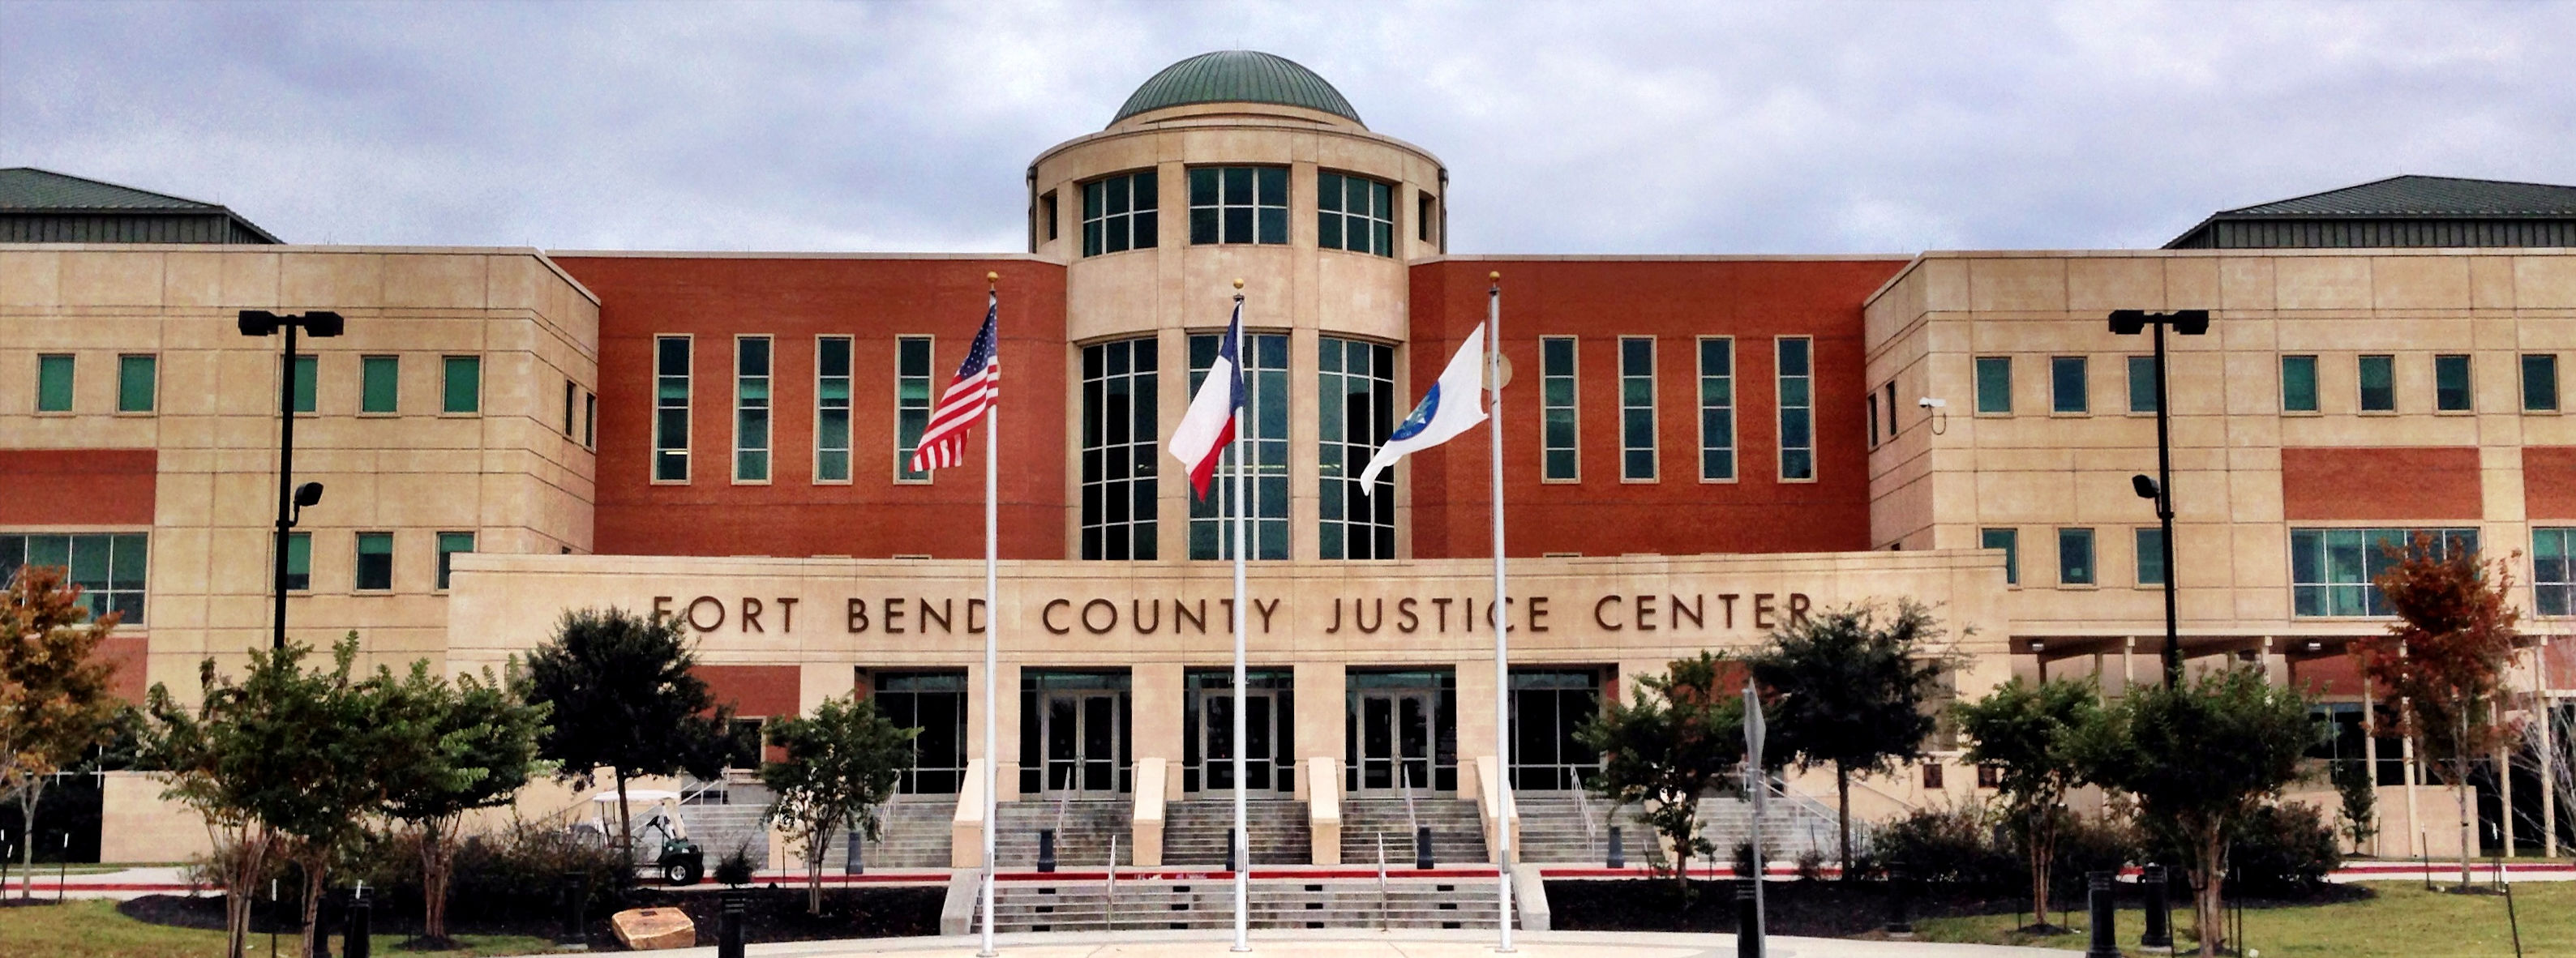 fort bend county divorce records